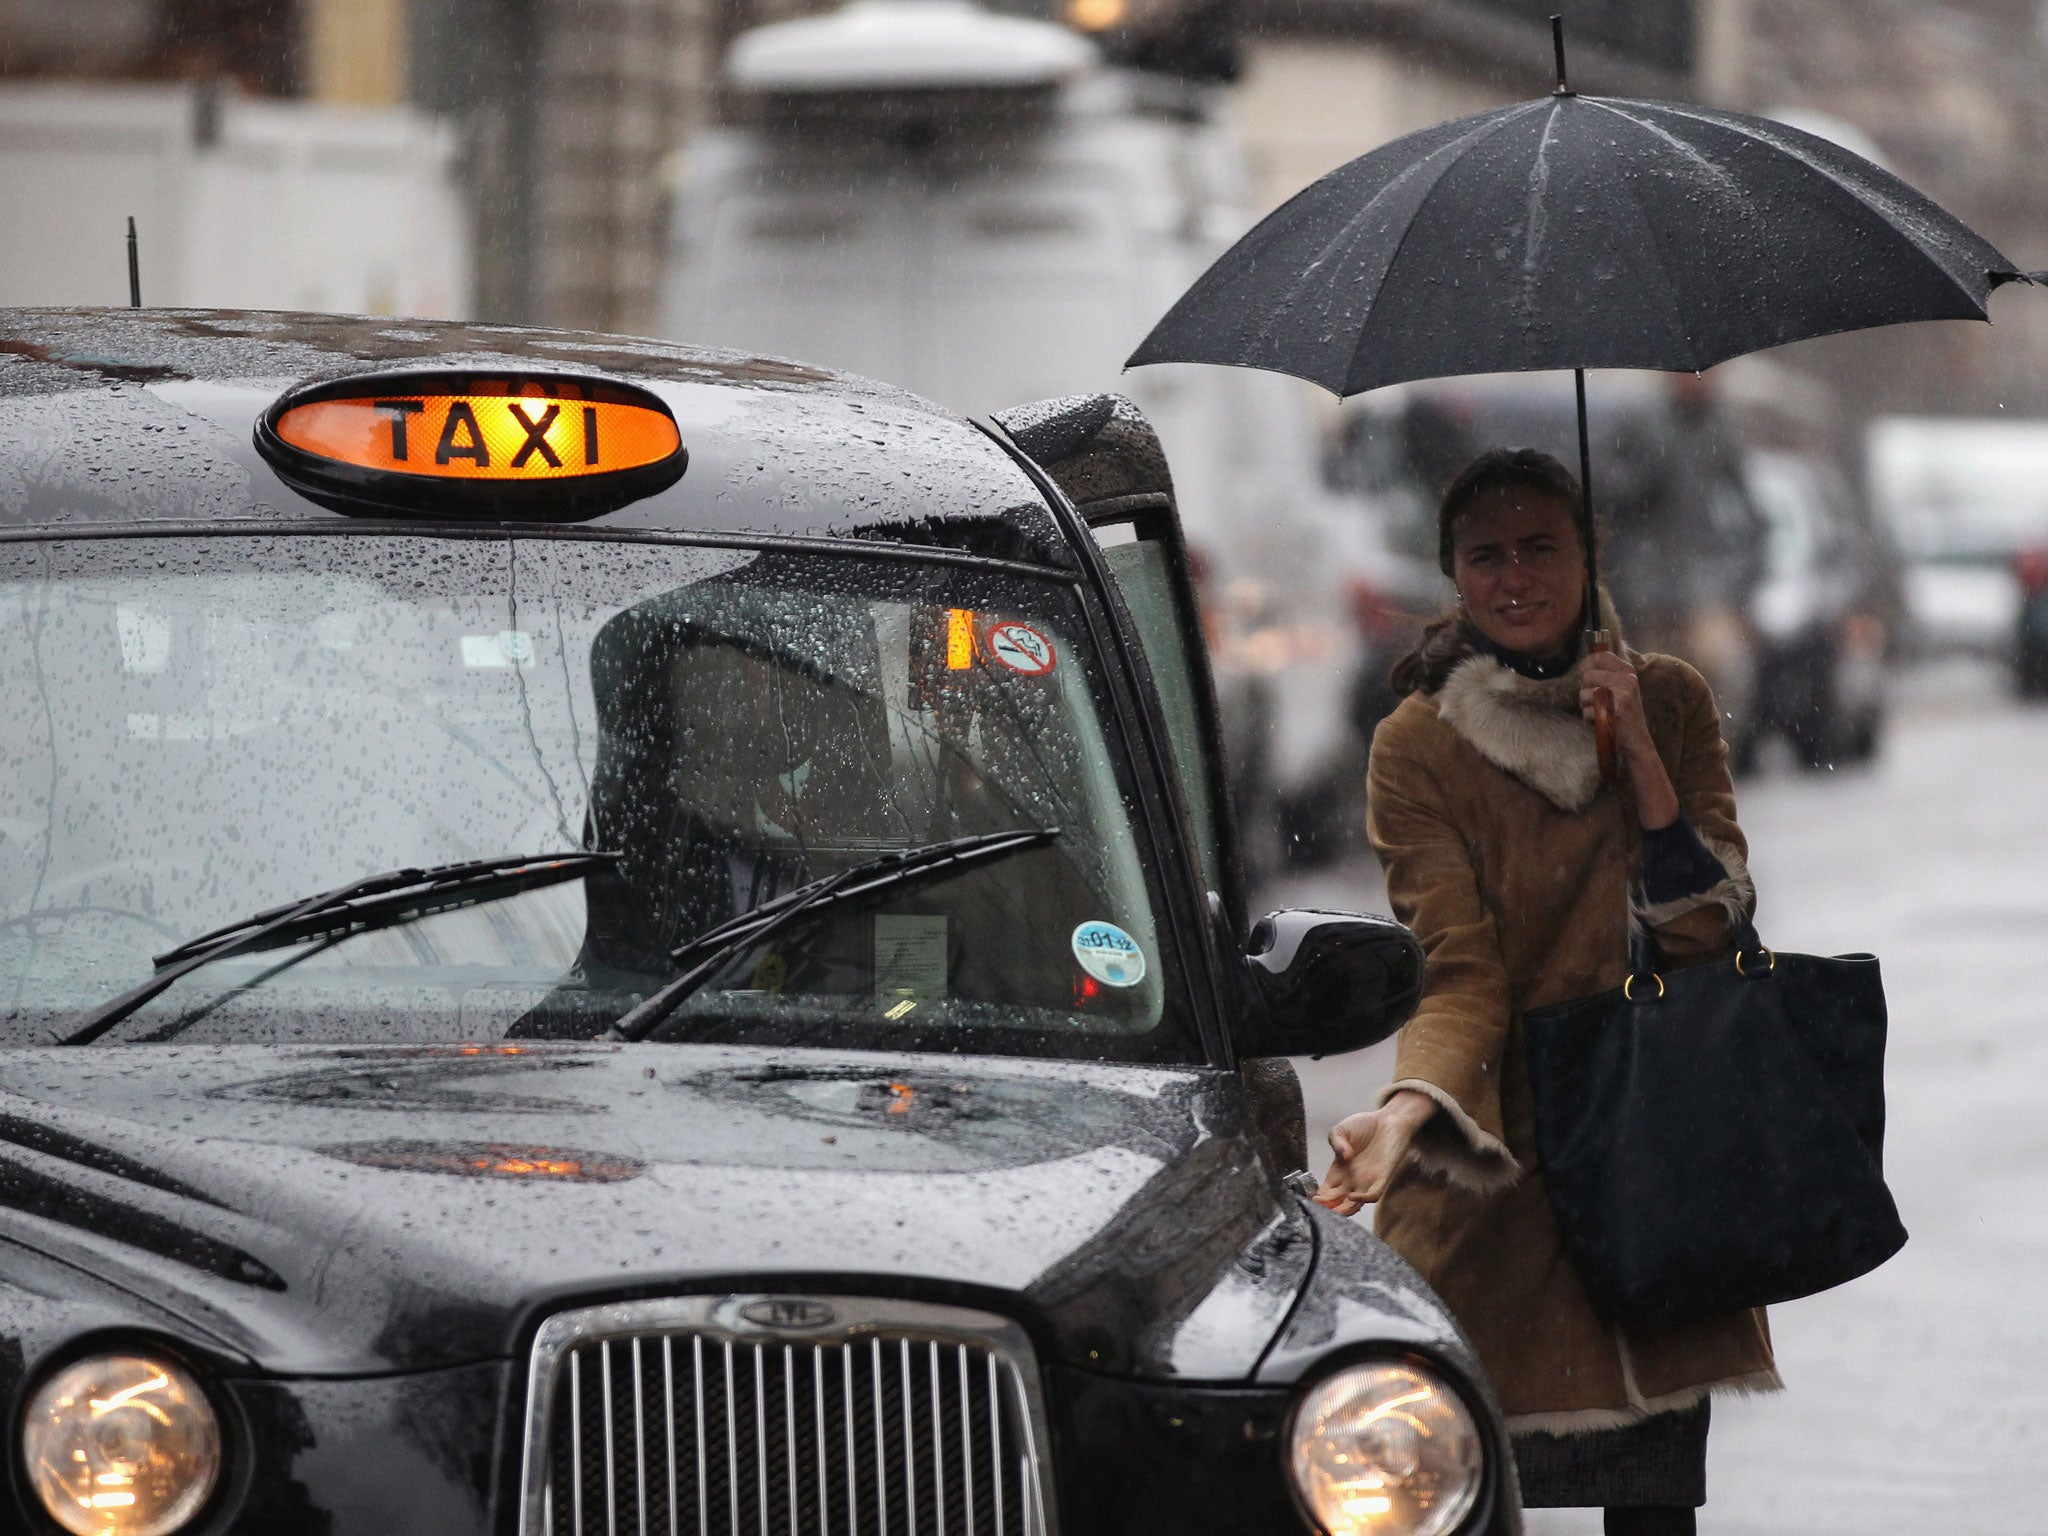 A woman holding an umbrella catches a London taxi in the pouring rain